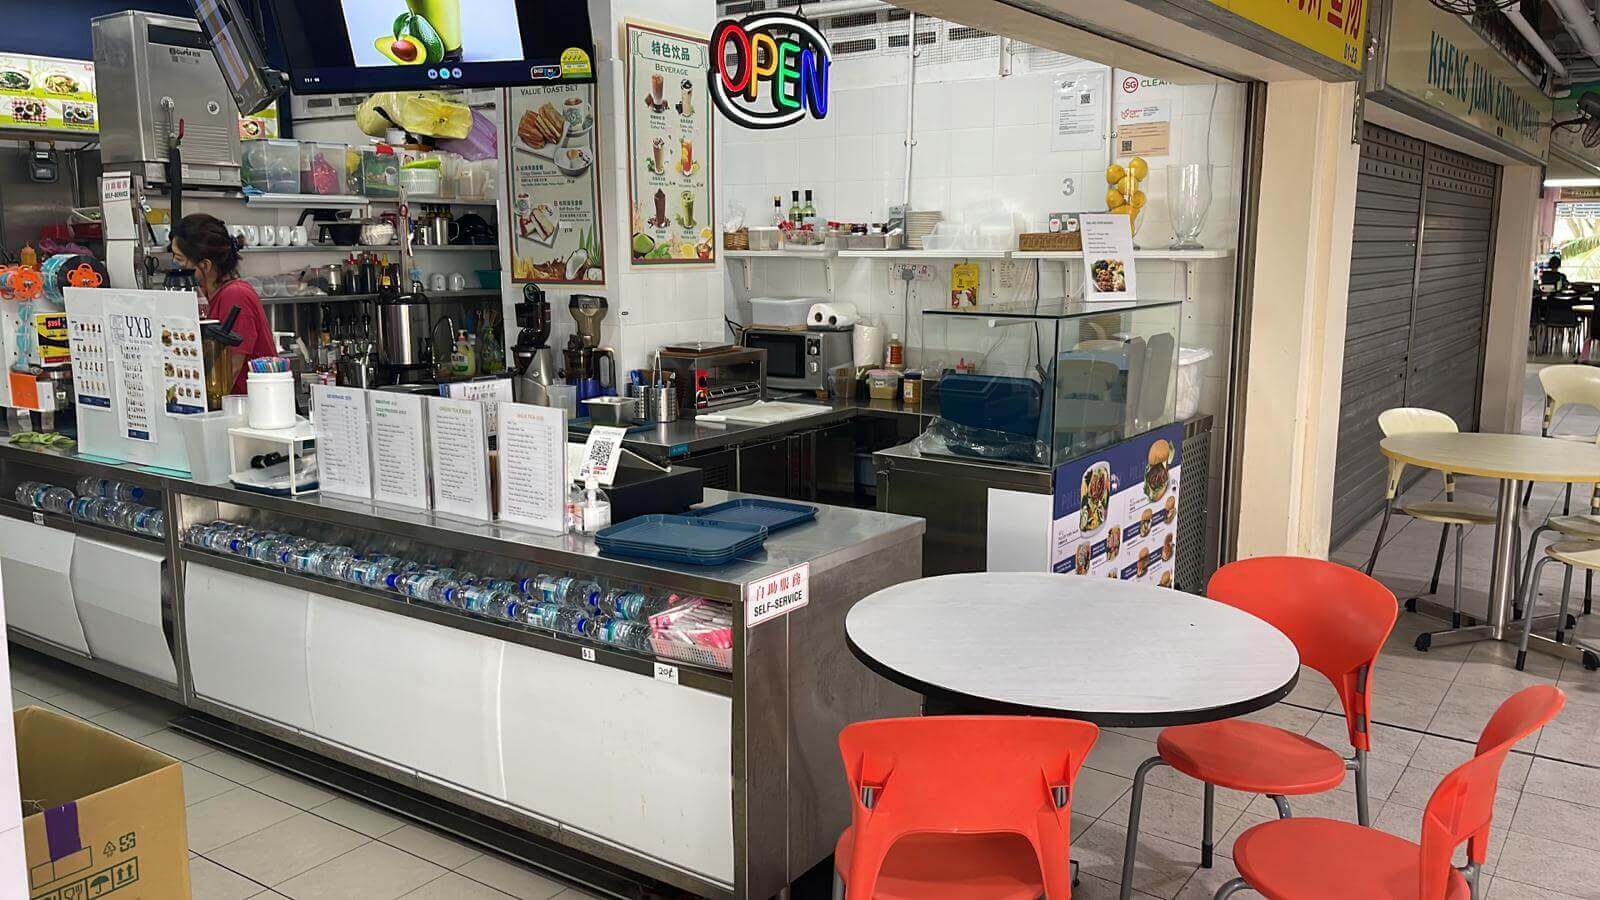 drink stall for rent $1500. Please WhatsApp me 98330324